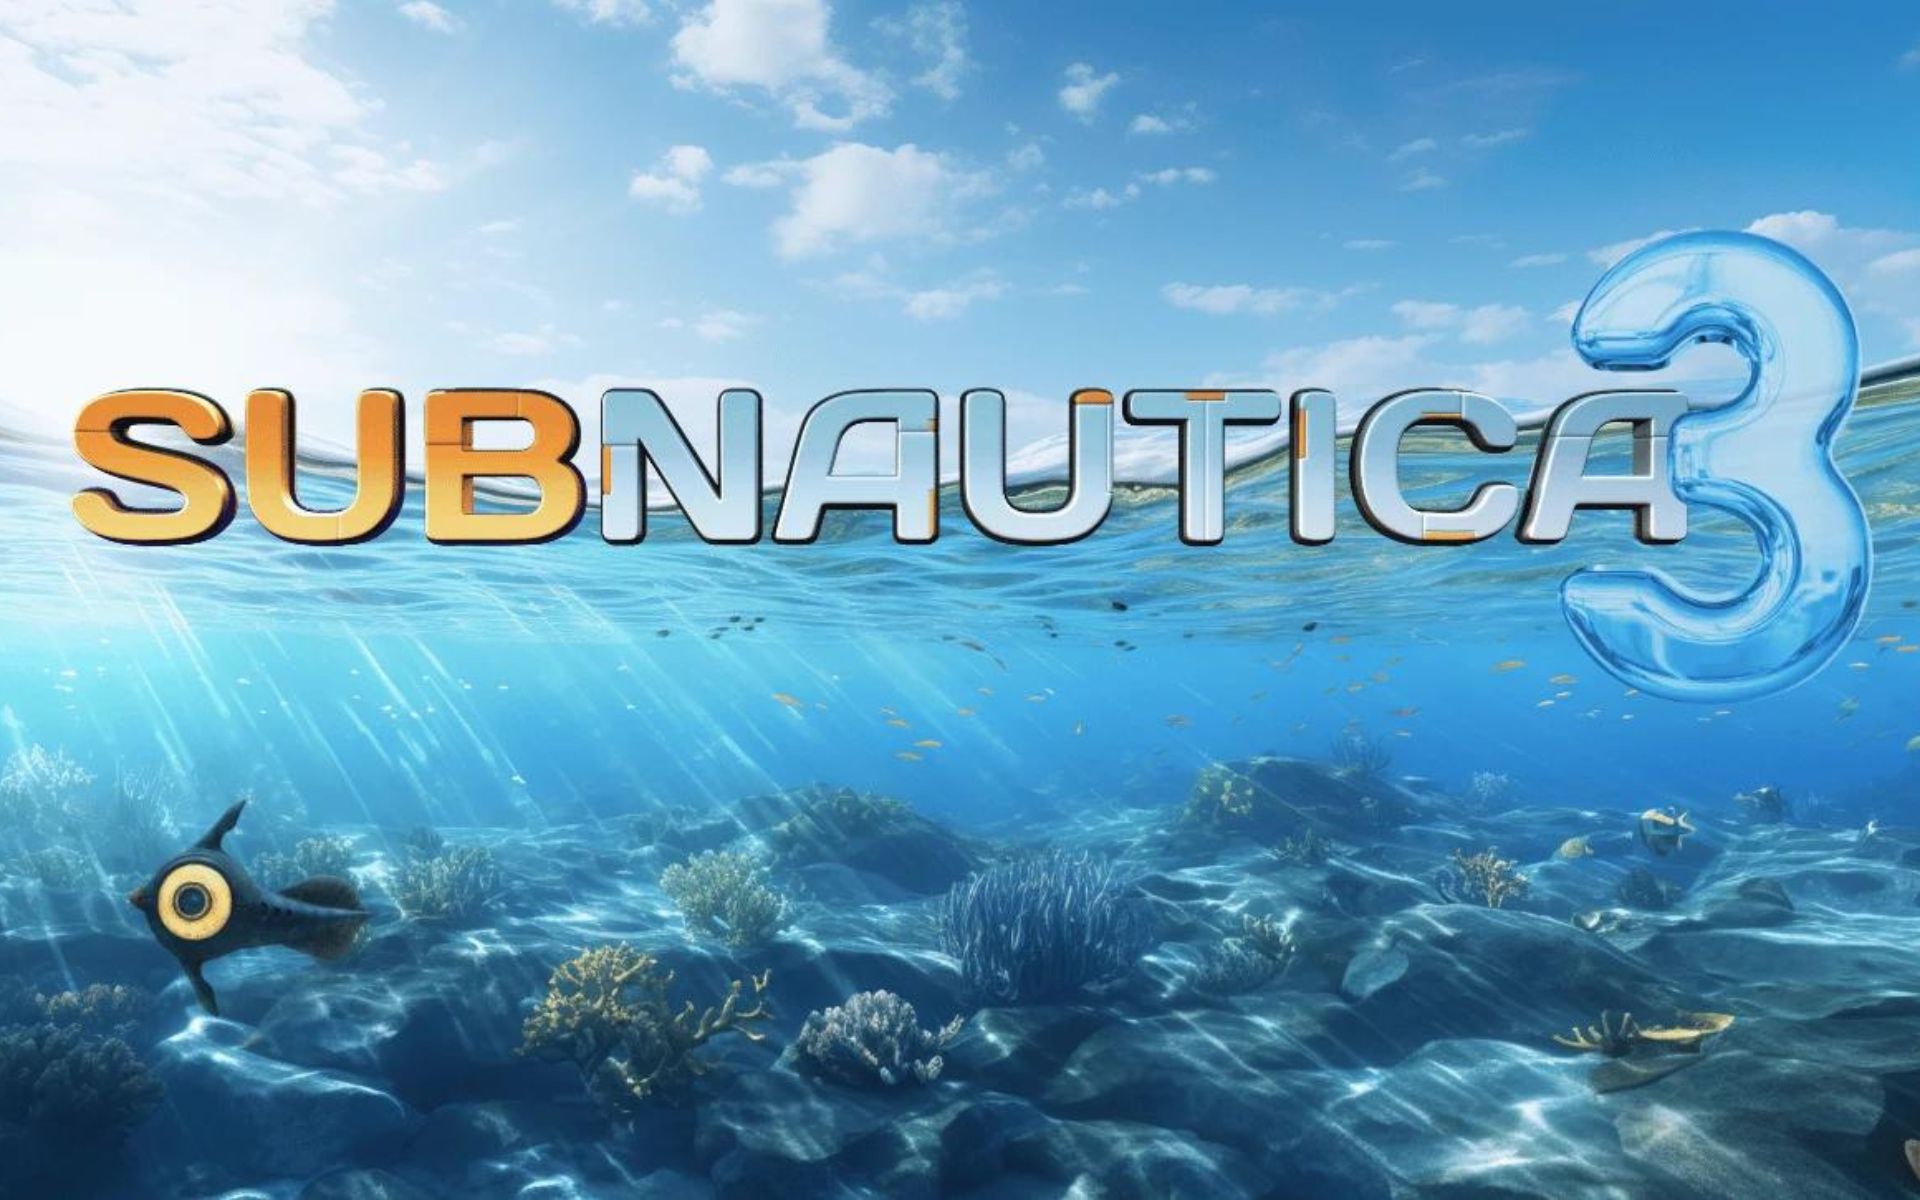 Subnautica developer introduces Subnautica 3 early access plans for 2024